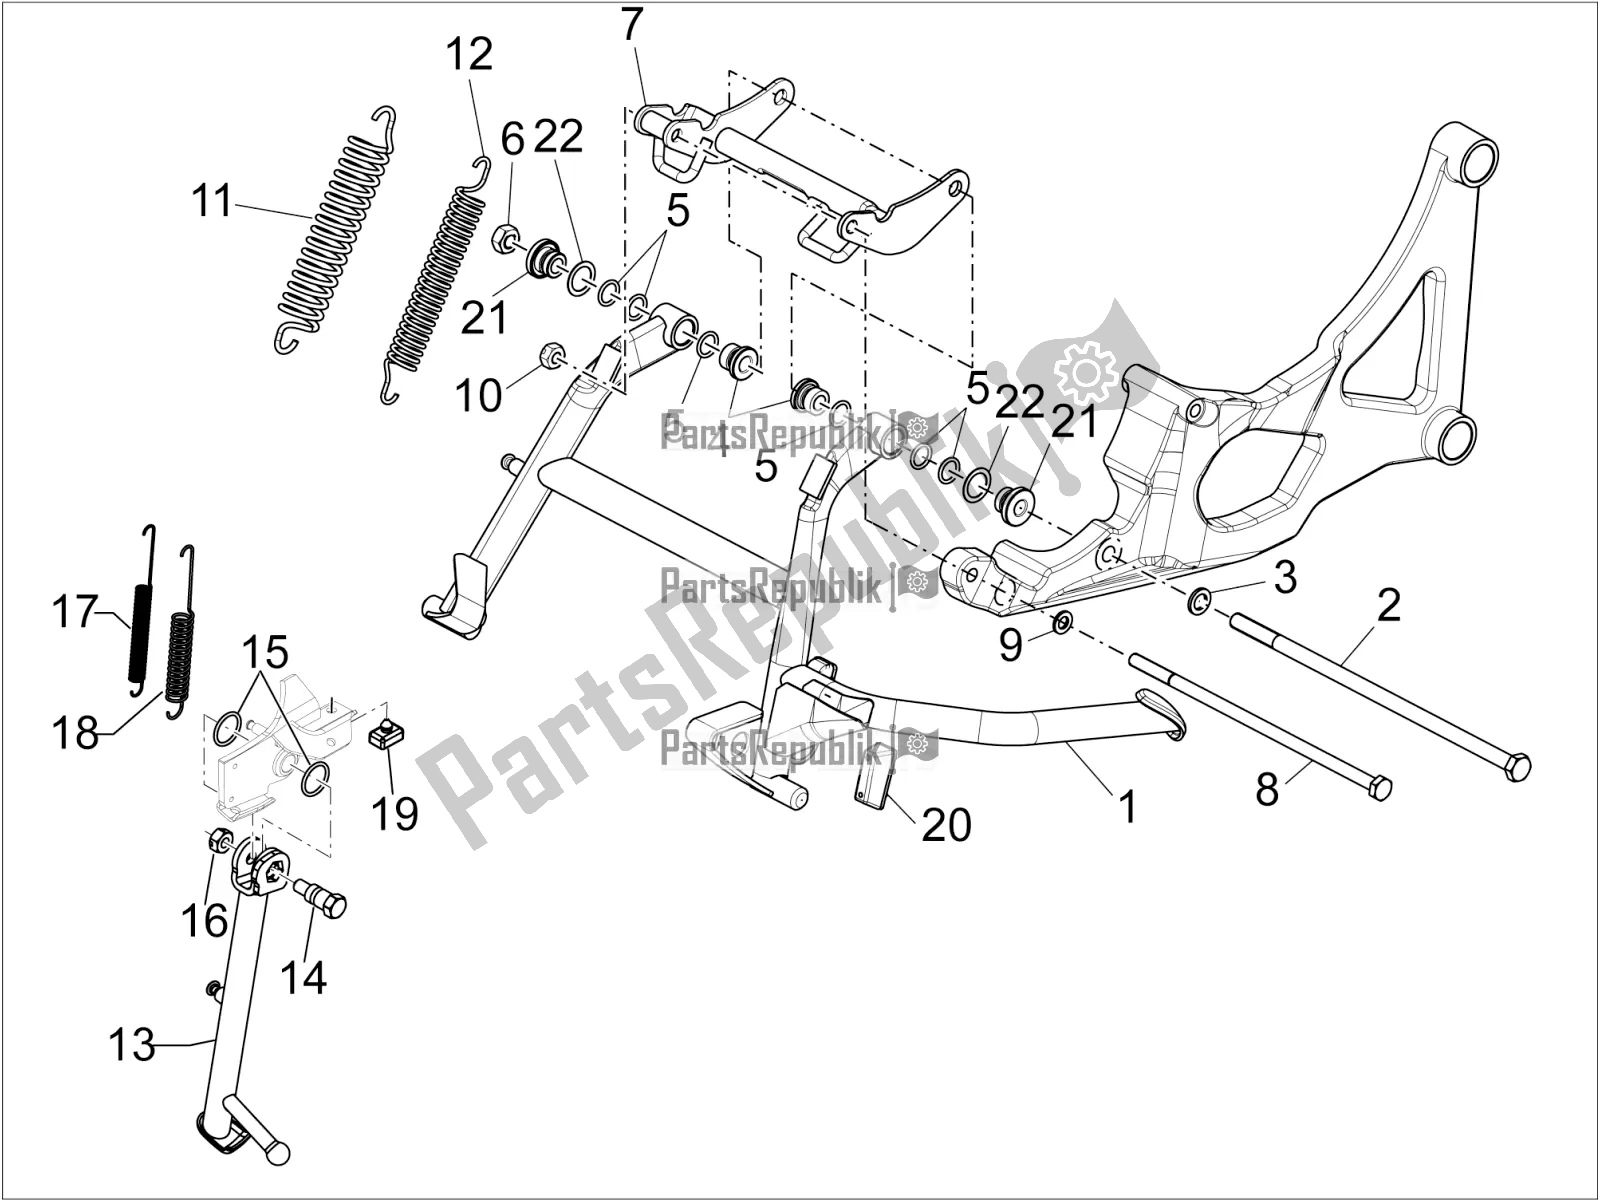 All parts for the Stand/s of the Aprilia SRV 850 2019